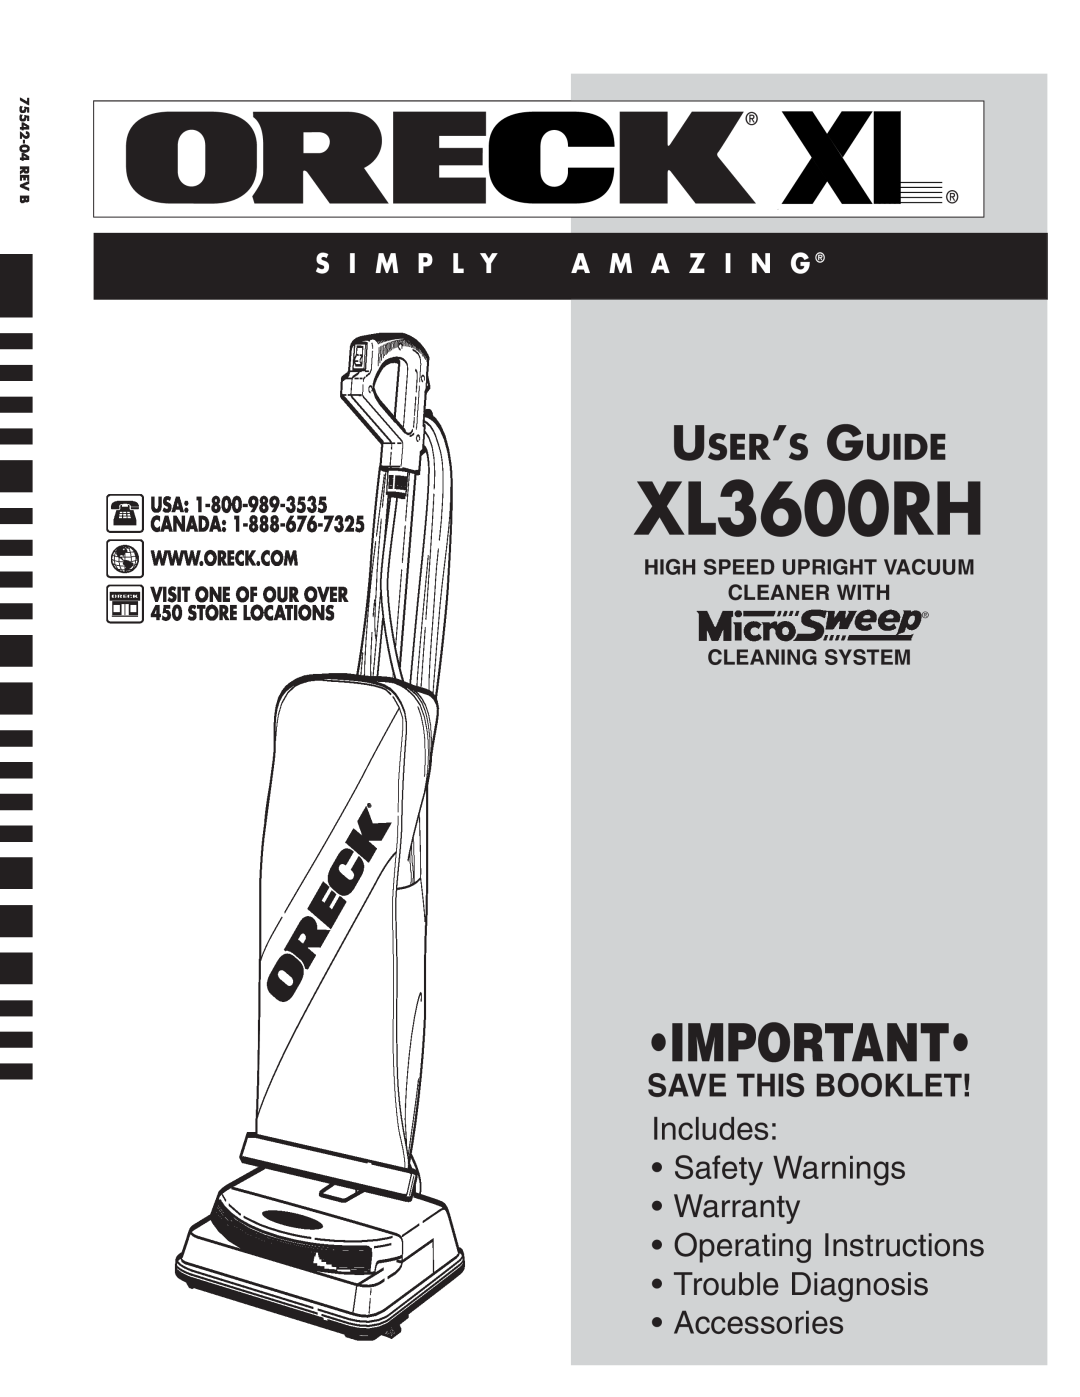 Oreck XL3600RH warranty High Speed Upright Vacuum Cleaner With, Cleaning System, User’S Guide, Save This Booklet, Rev B 